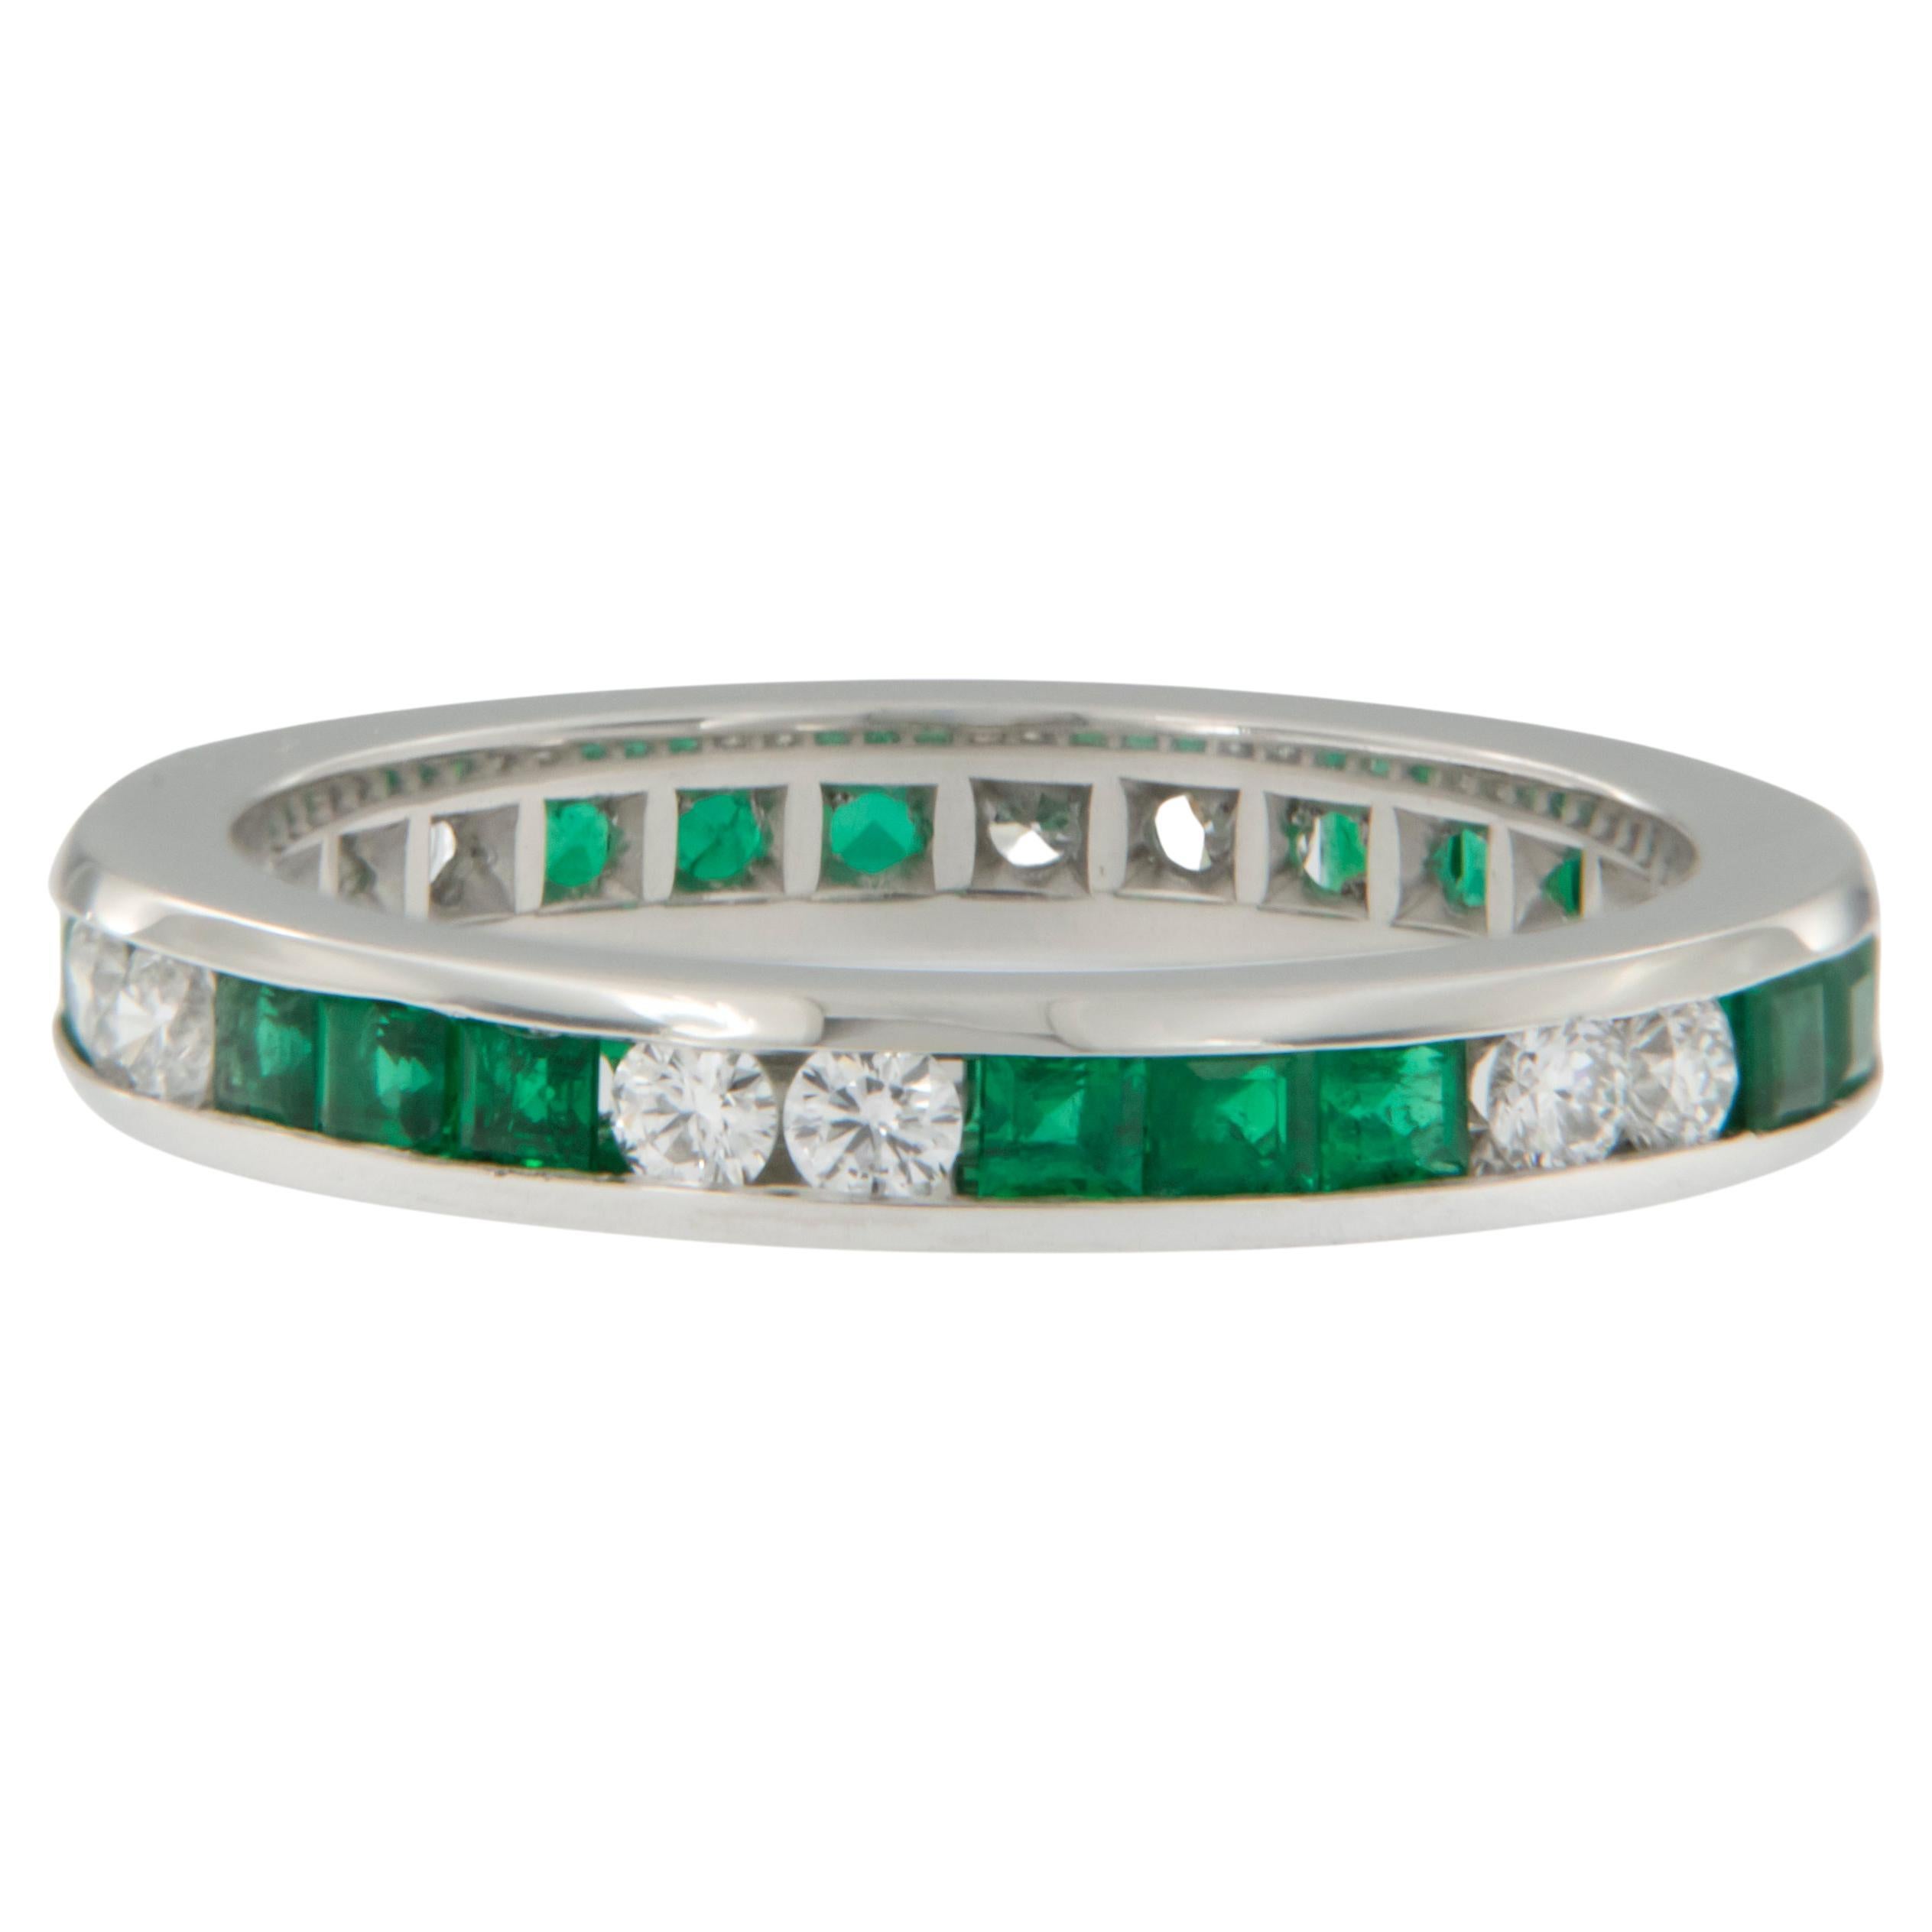 Made in New York & known for his superb, finest quality gems & craftsmanship, this set of unbelievable platinum eternity bands are jaw dropping gorgeous! Each fine richly colored emeralds are precision cut & matched with the fine diamonds and